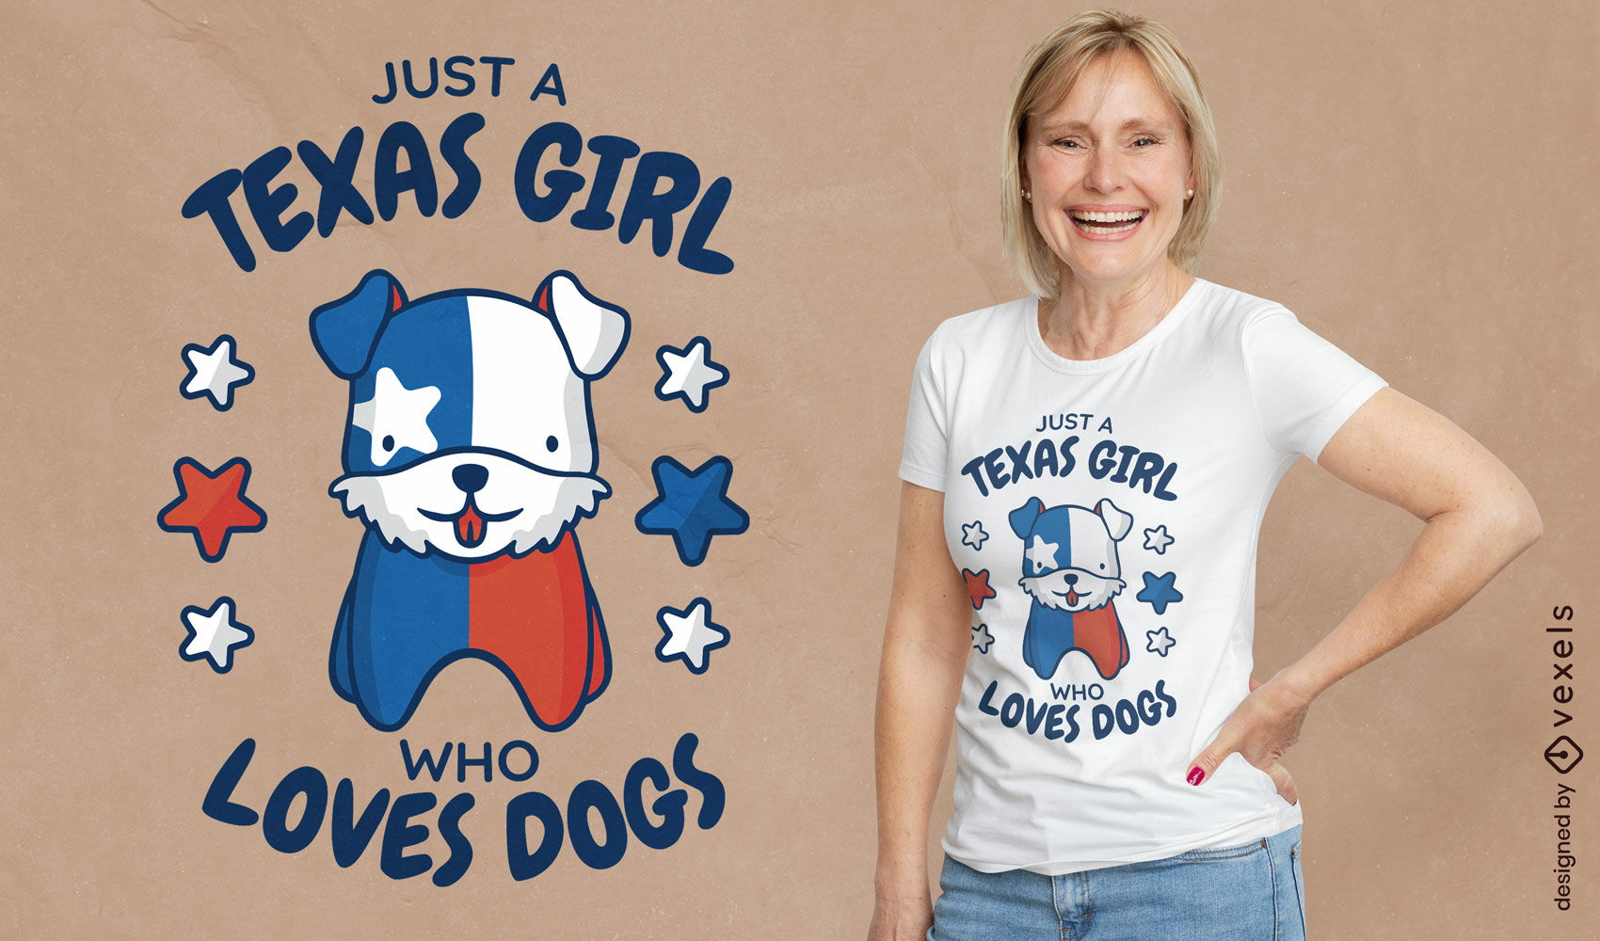 Texas girl and dogs t-shirt design